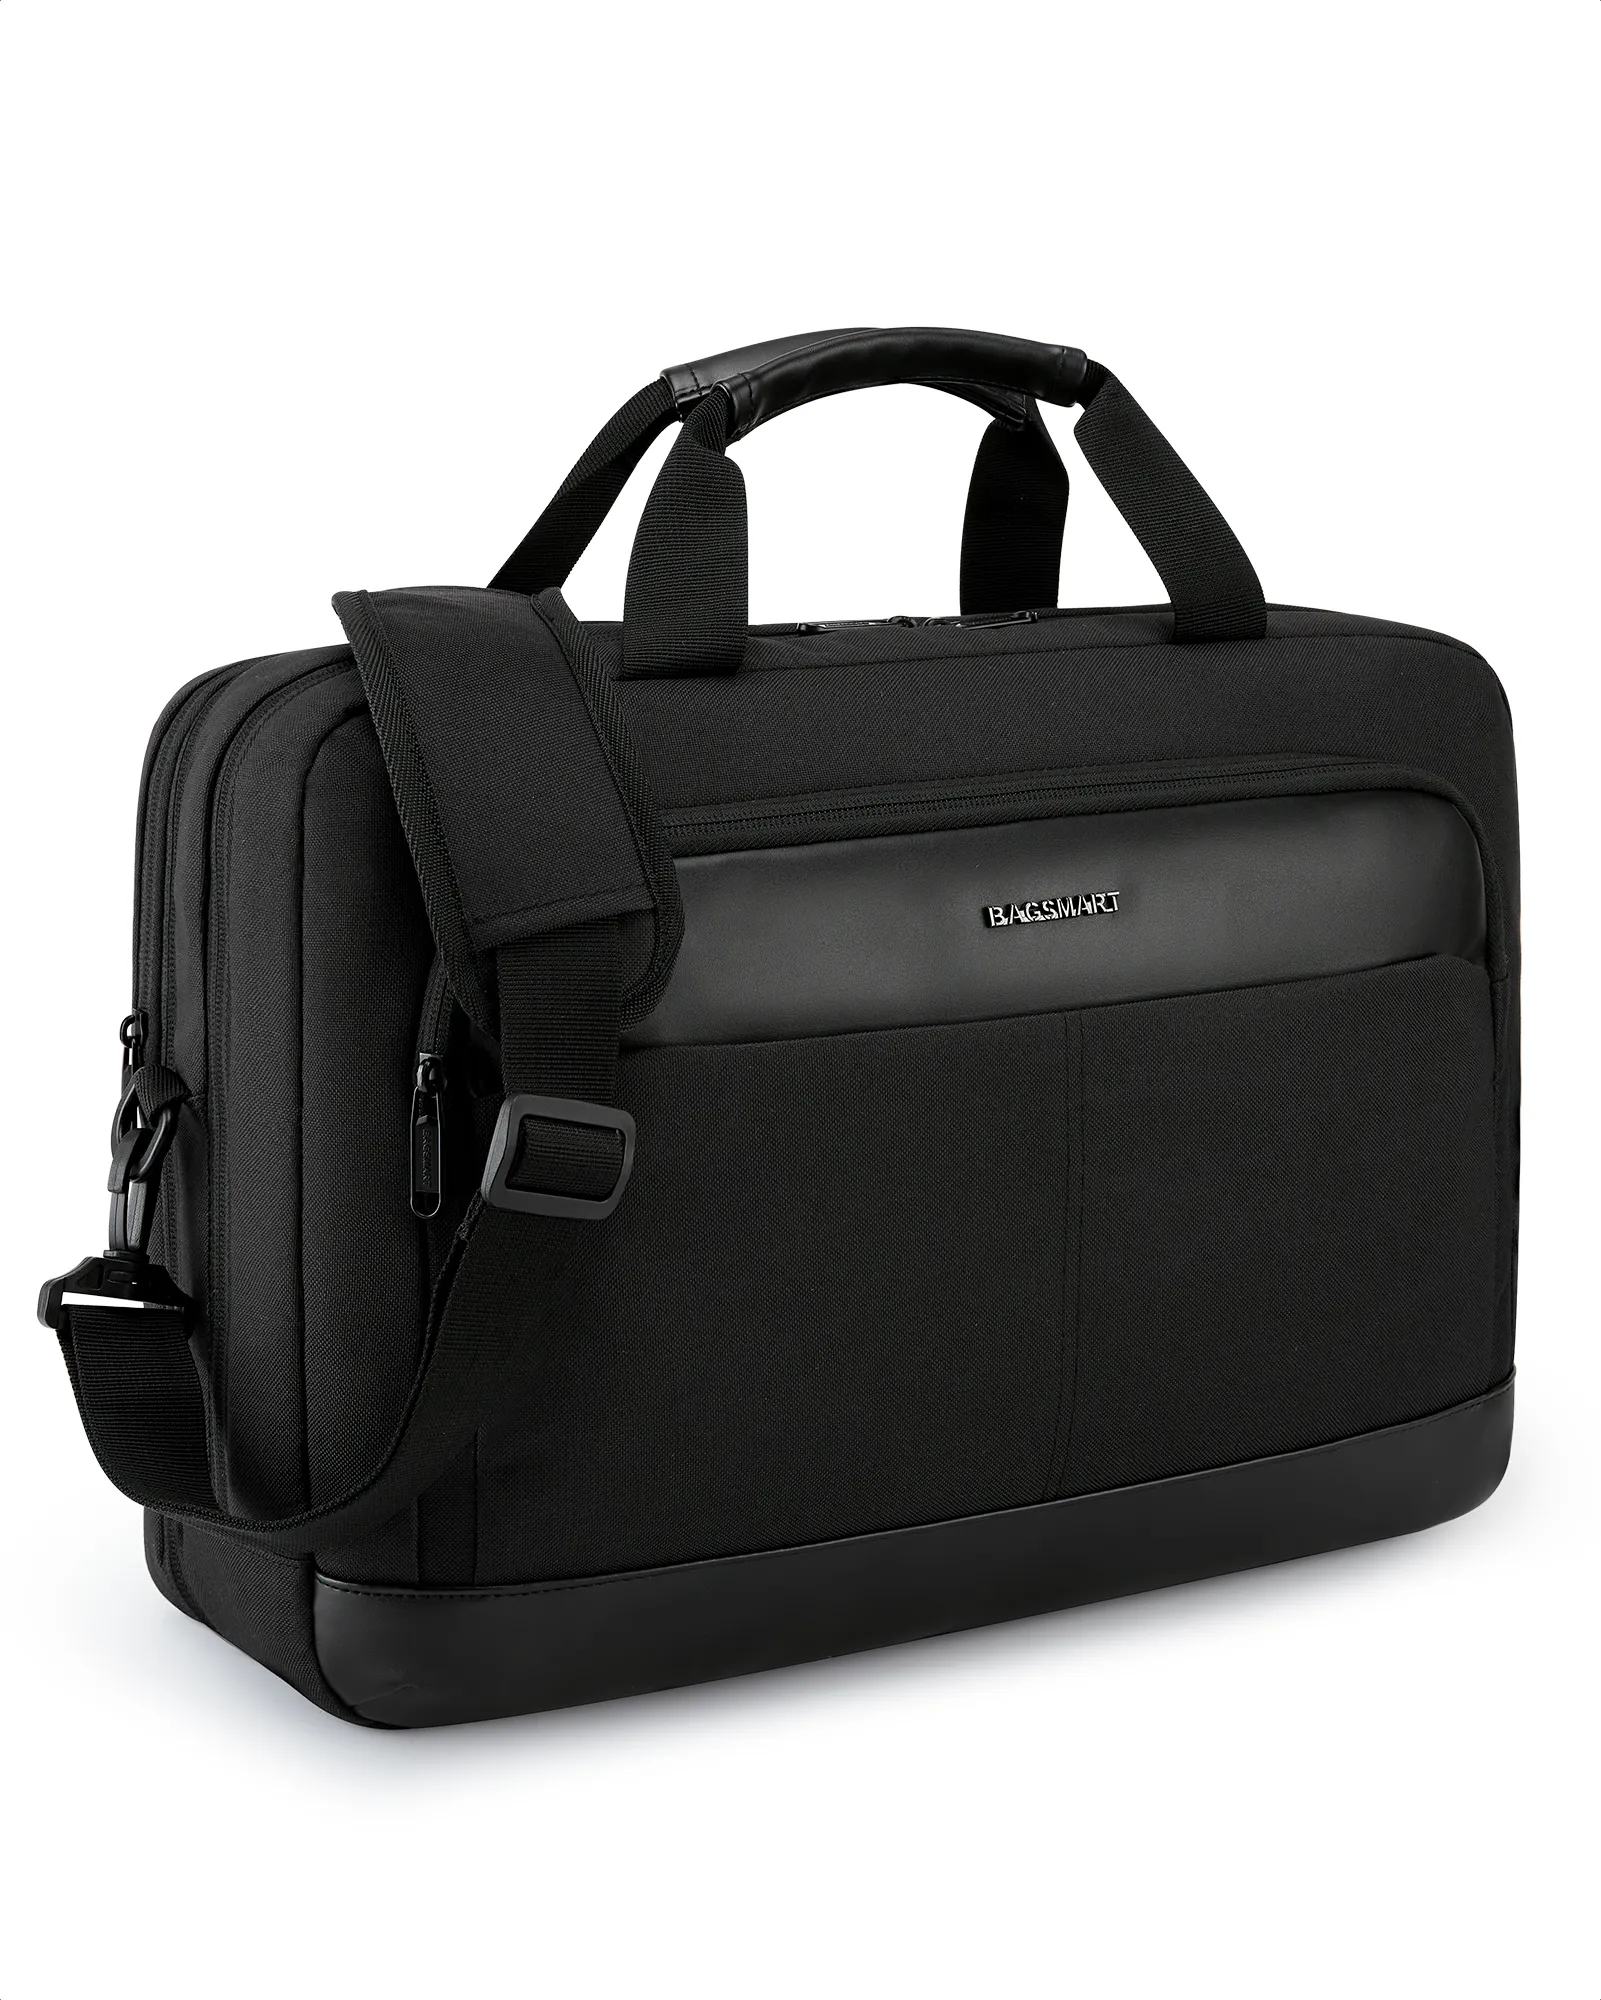 Briefcase With Shoulder Strap: BAGSMART 30L Expandable Laptop Briefcase for Men, Ideal for Work, Business, College, and Travel (17.3-inch)